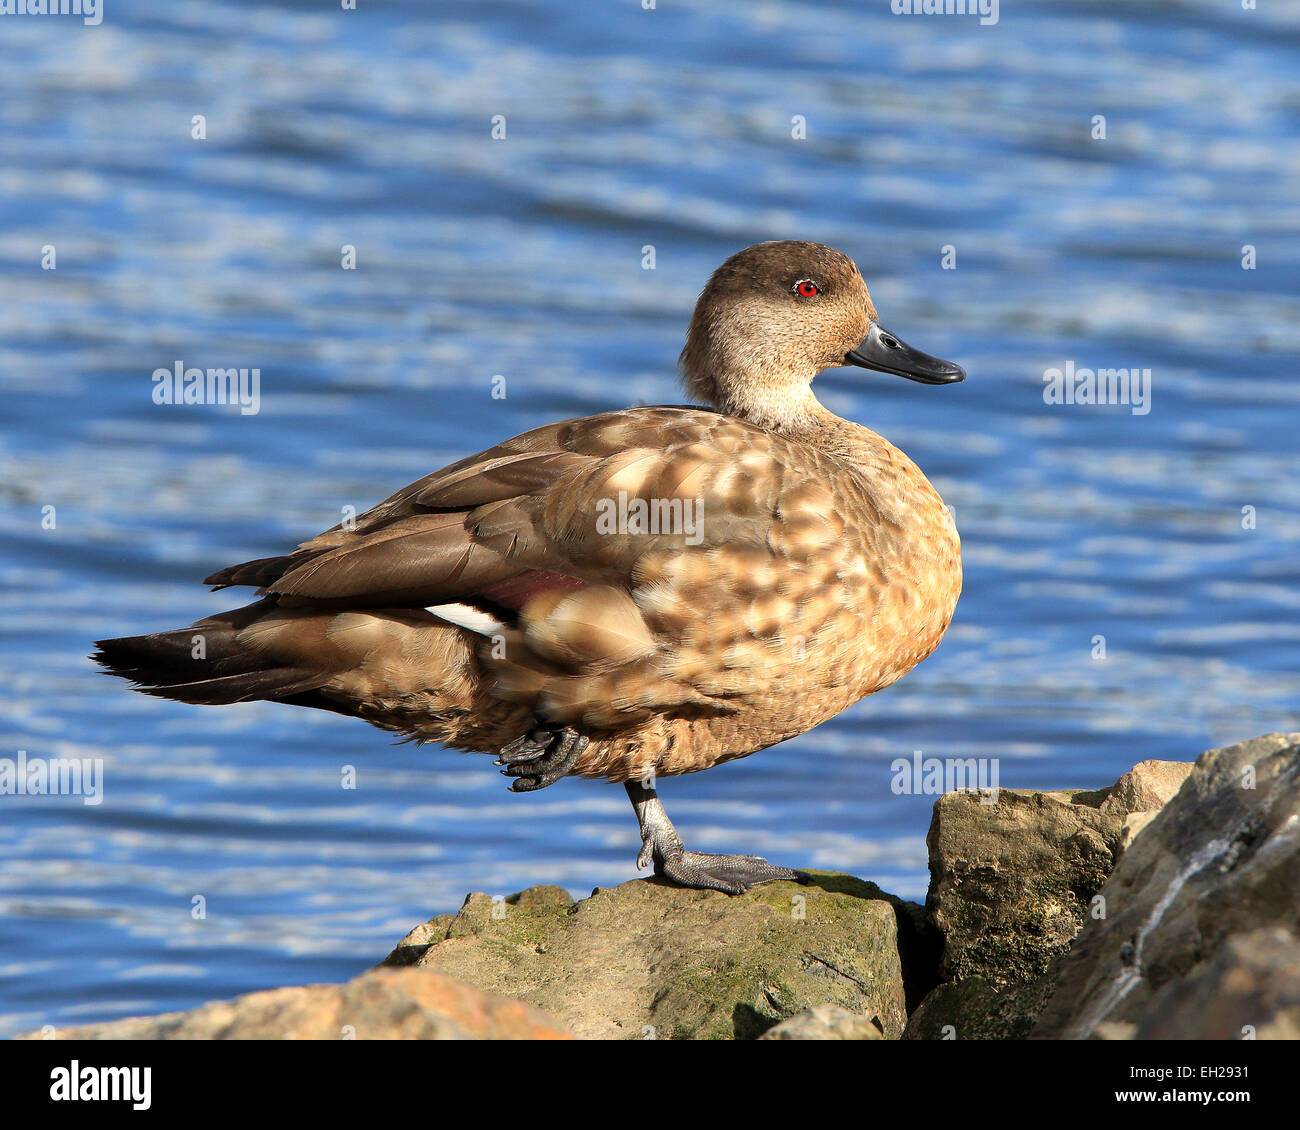 Patagonian Crested Duck, Lophonetta Specularioides Specularioides, in Ushuaia Argentina, South America. Stock Photo